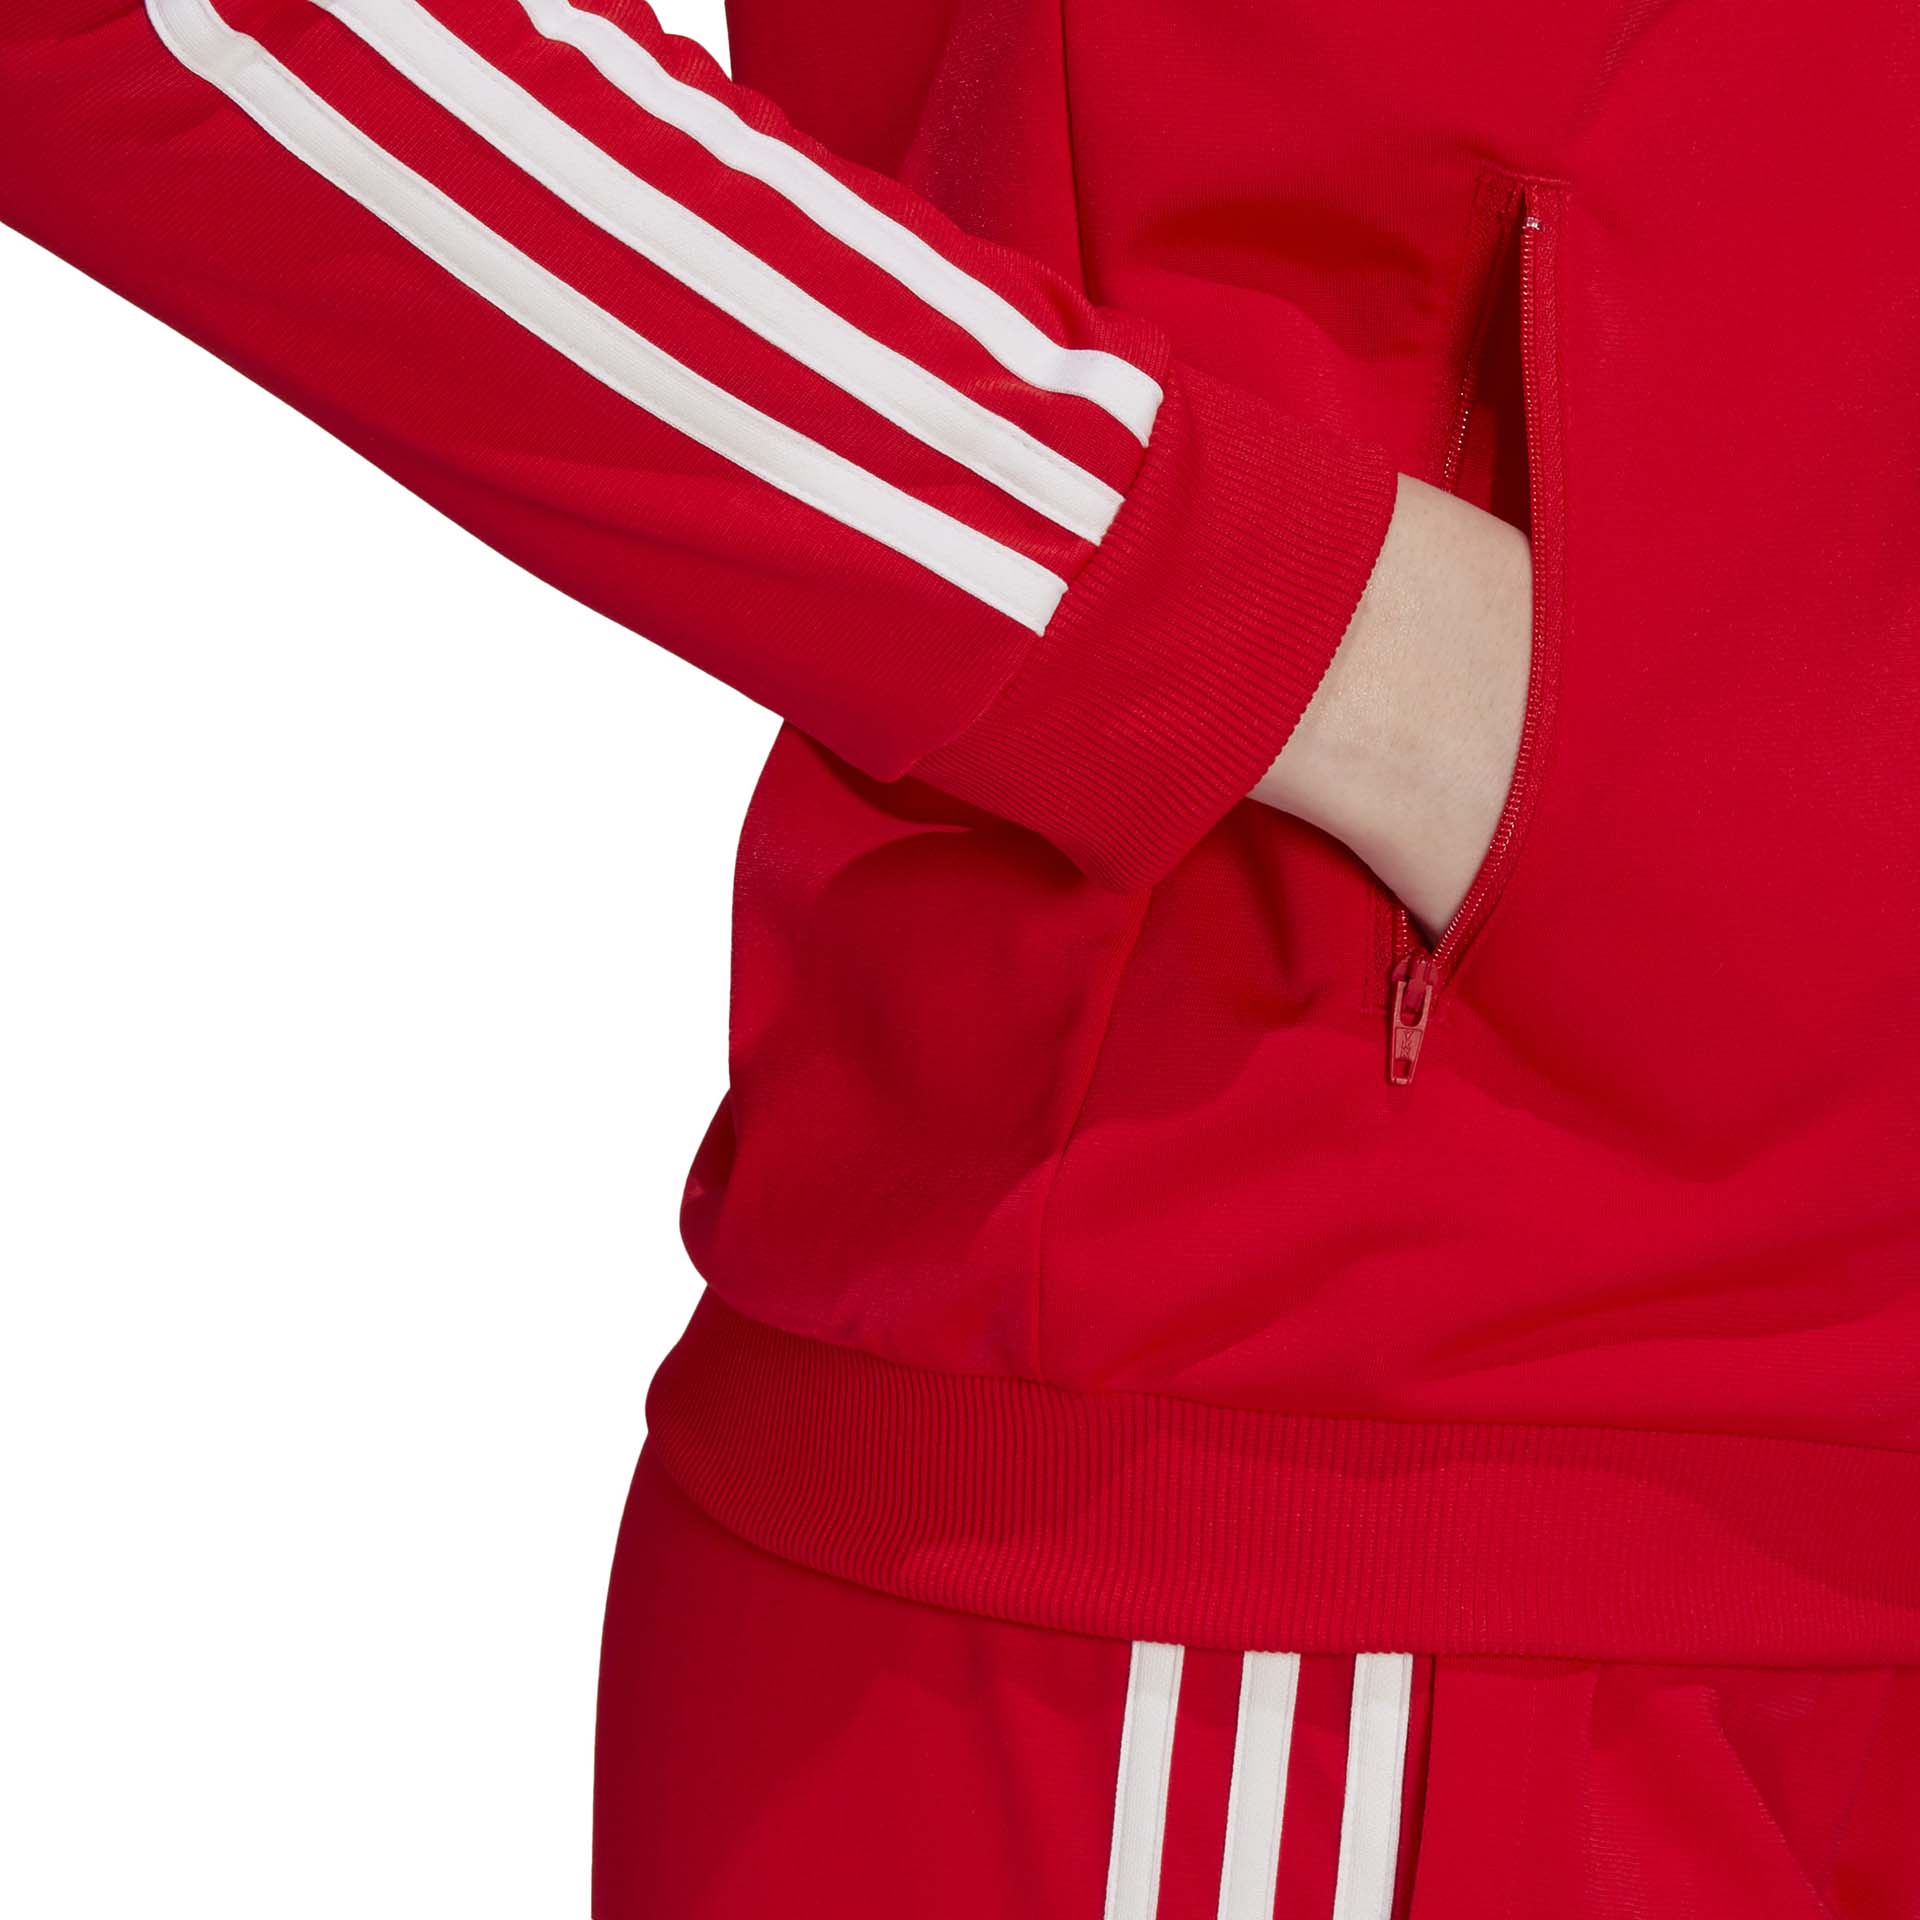 adidas women's 3 Stripes Track suit Vivid Red / White